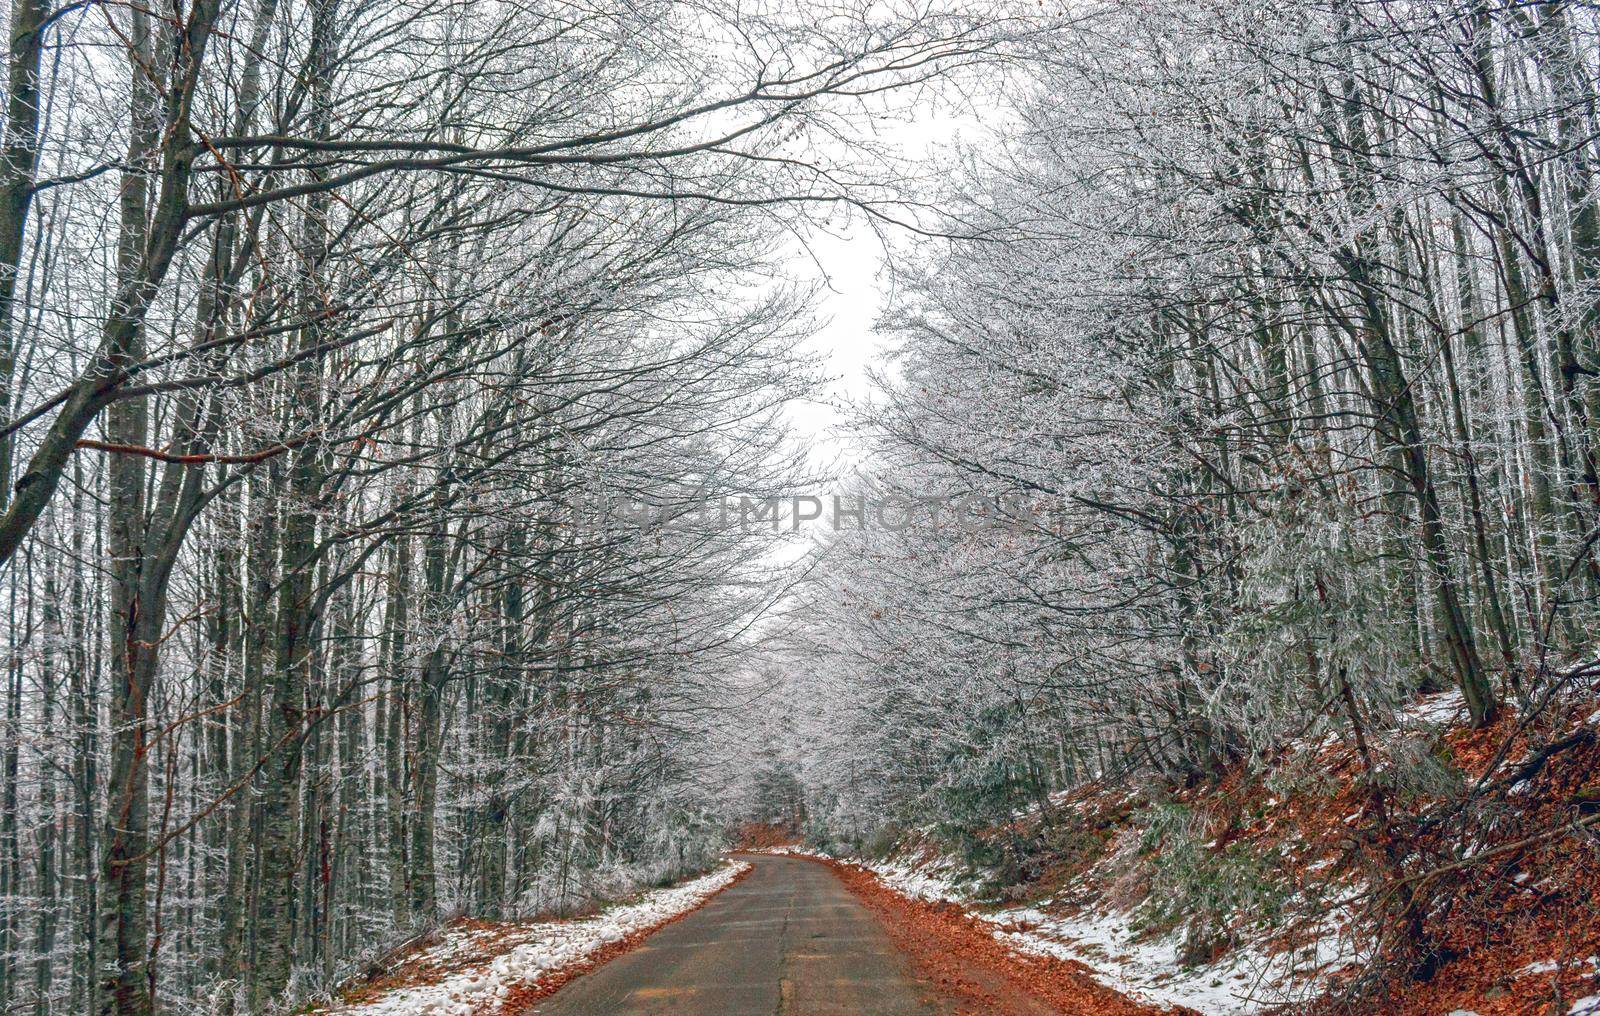 Icy road surrounded by white trees on the mountain by bybyphotography